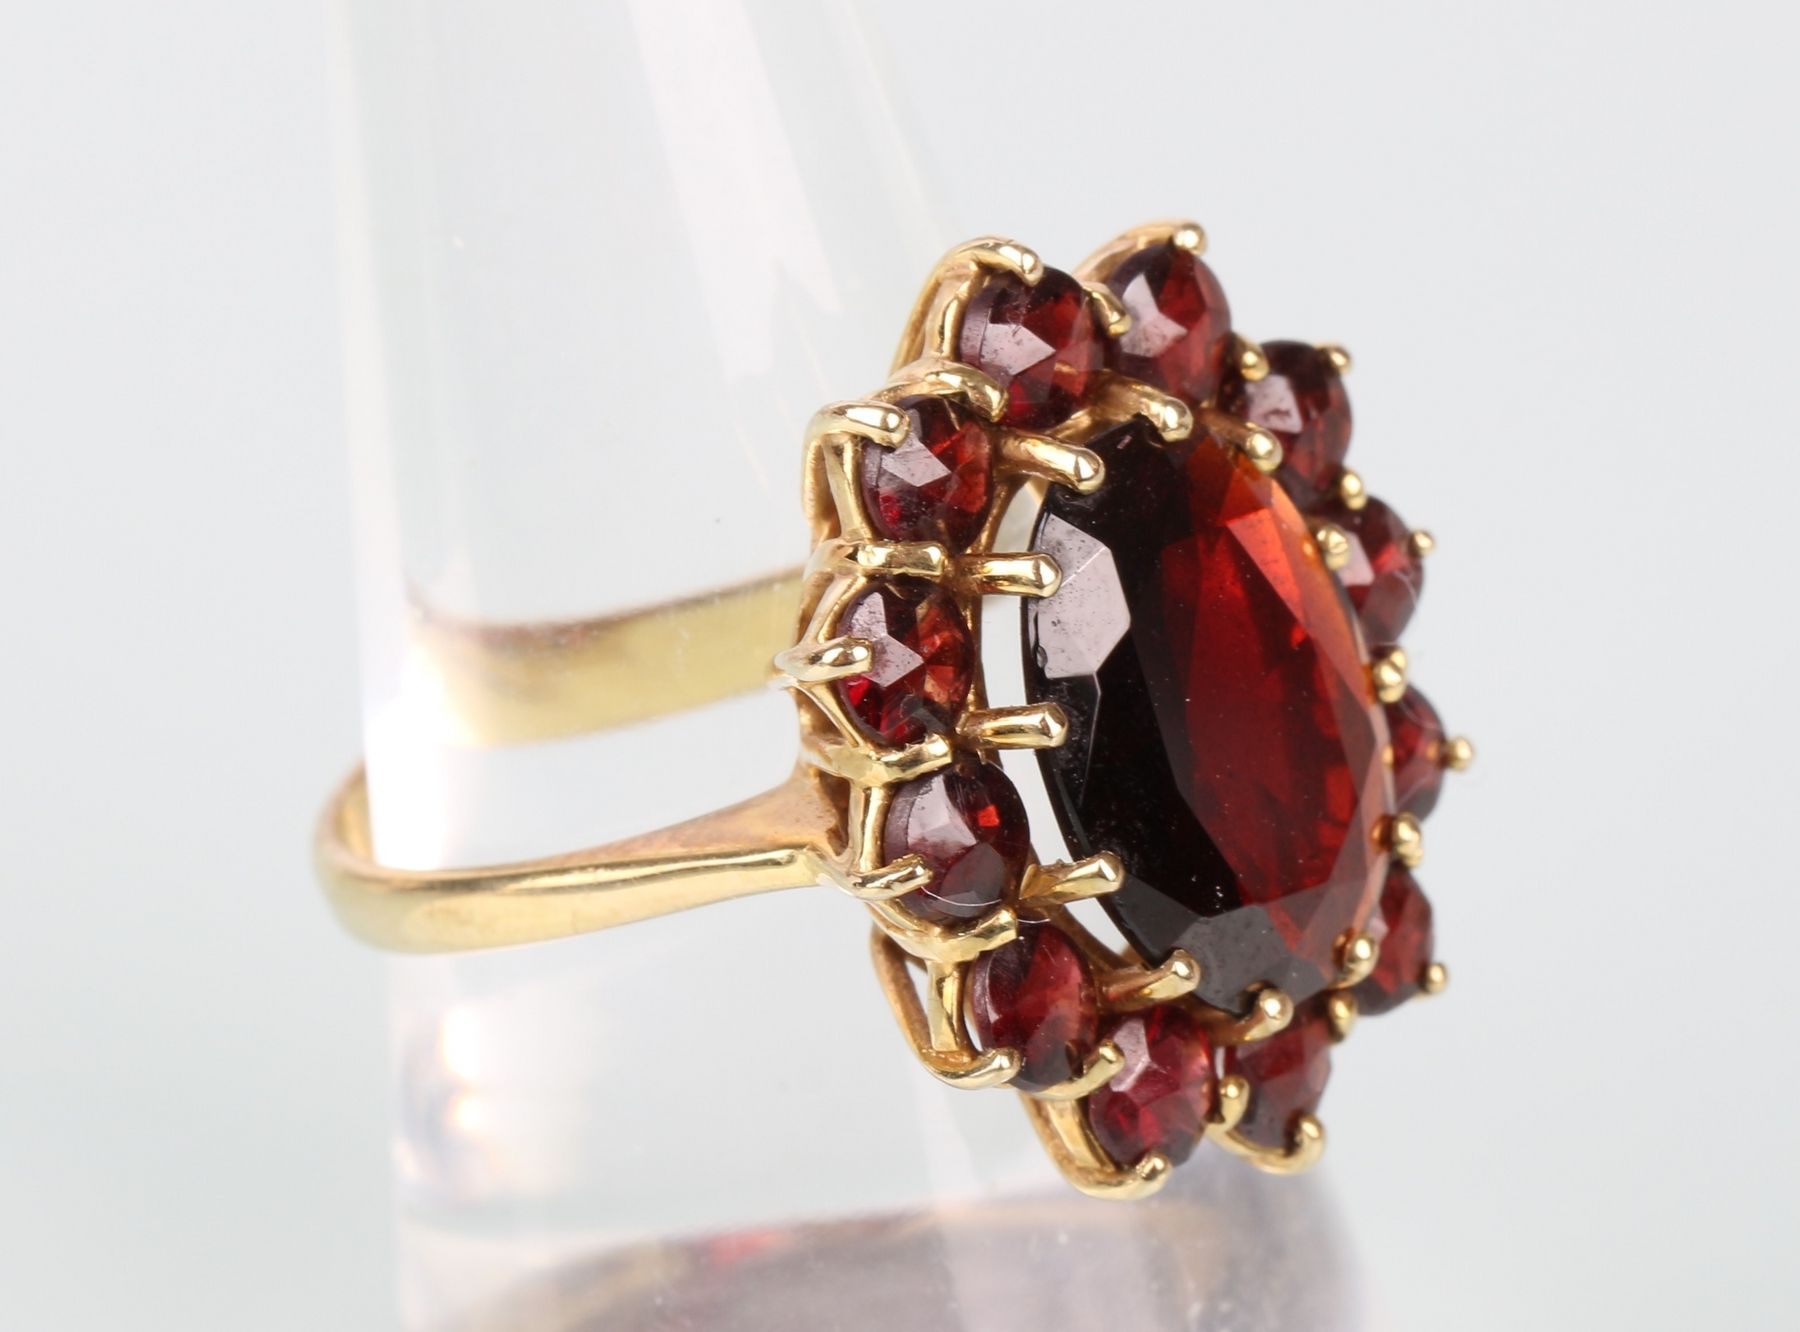 333 Gold Granatring, gold ring, GG 333/000 yellow gold, gold ring with garnets, &hellip;